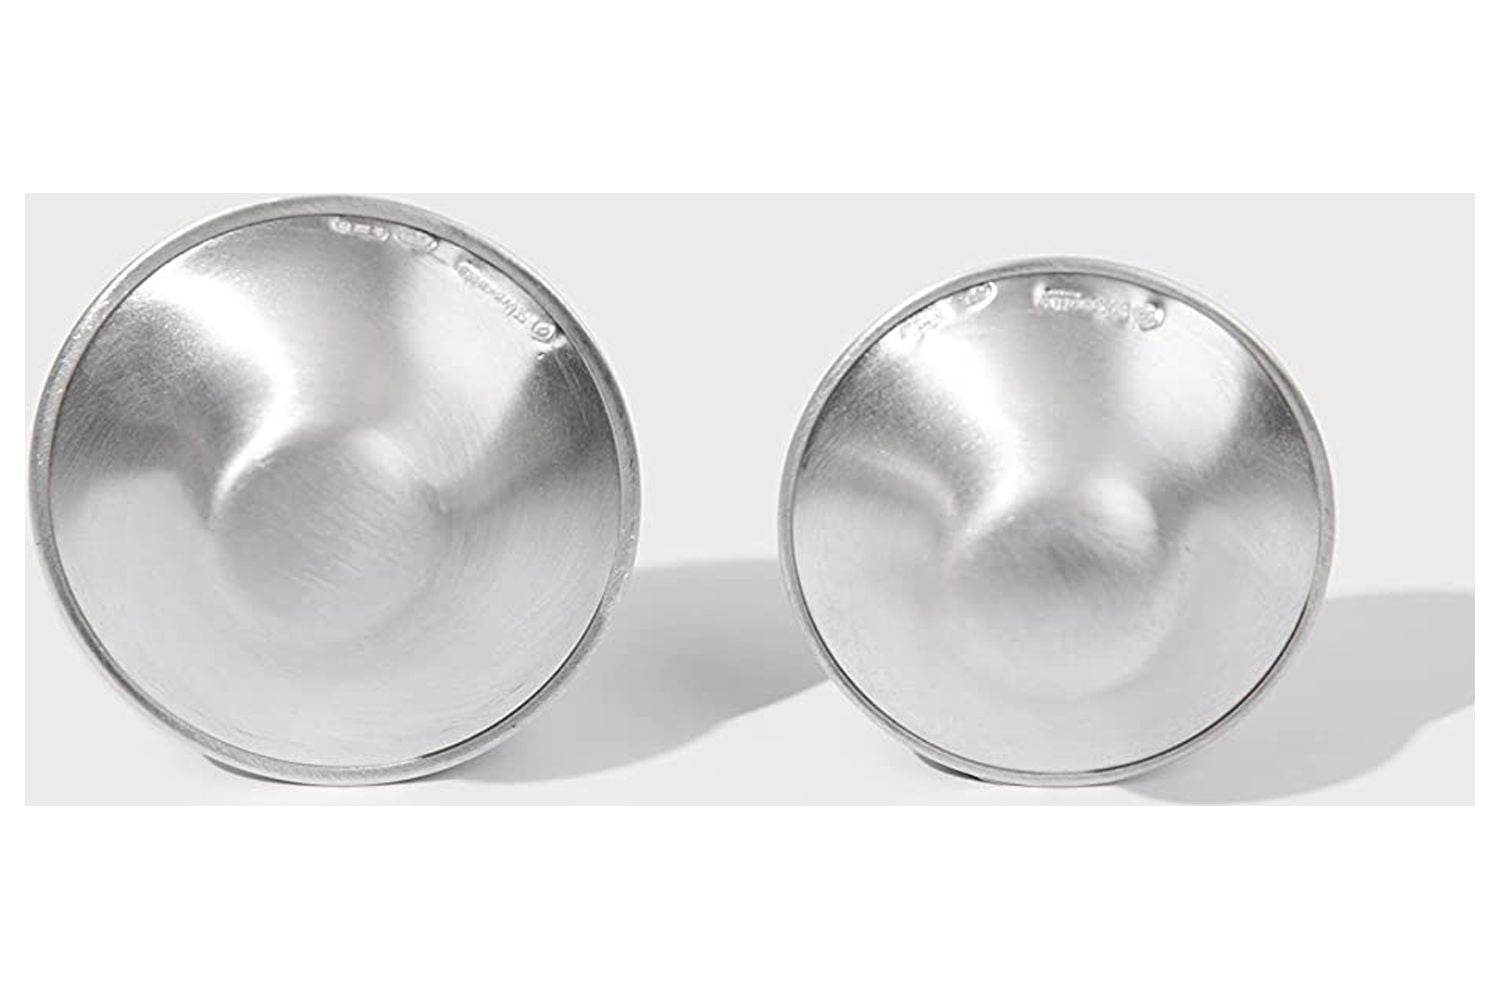 SILVERETTE The Original Silver Nursing Cups, Silverettes Metal Nipple  Covers for Breastfeeding, Nursing Shield, 925 Silver Nipple Cover Guards,  Soothe and Protect Sore Nipples -Made in Italy Regular 